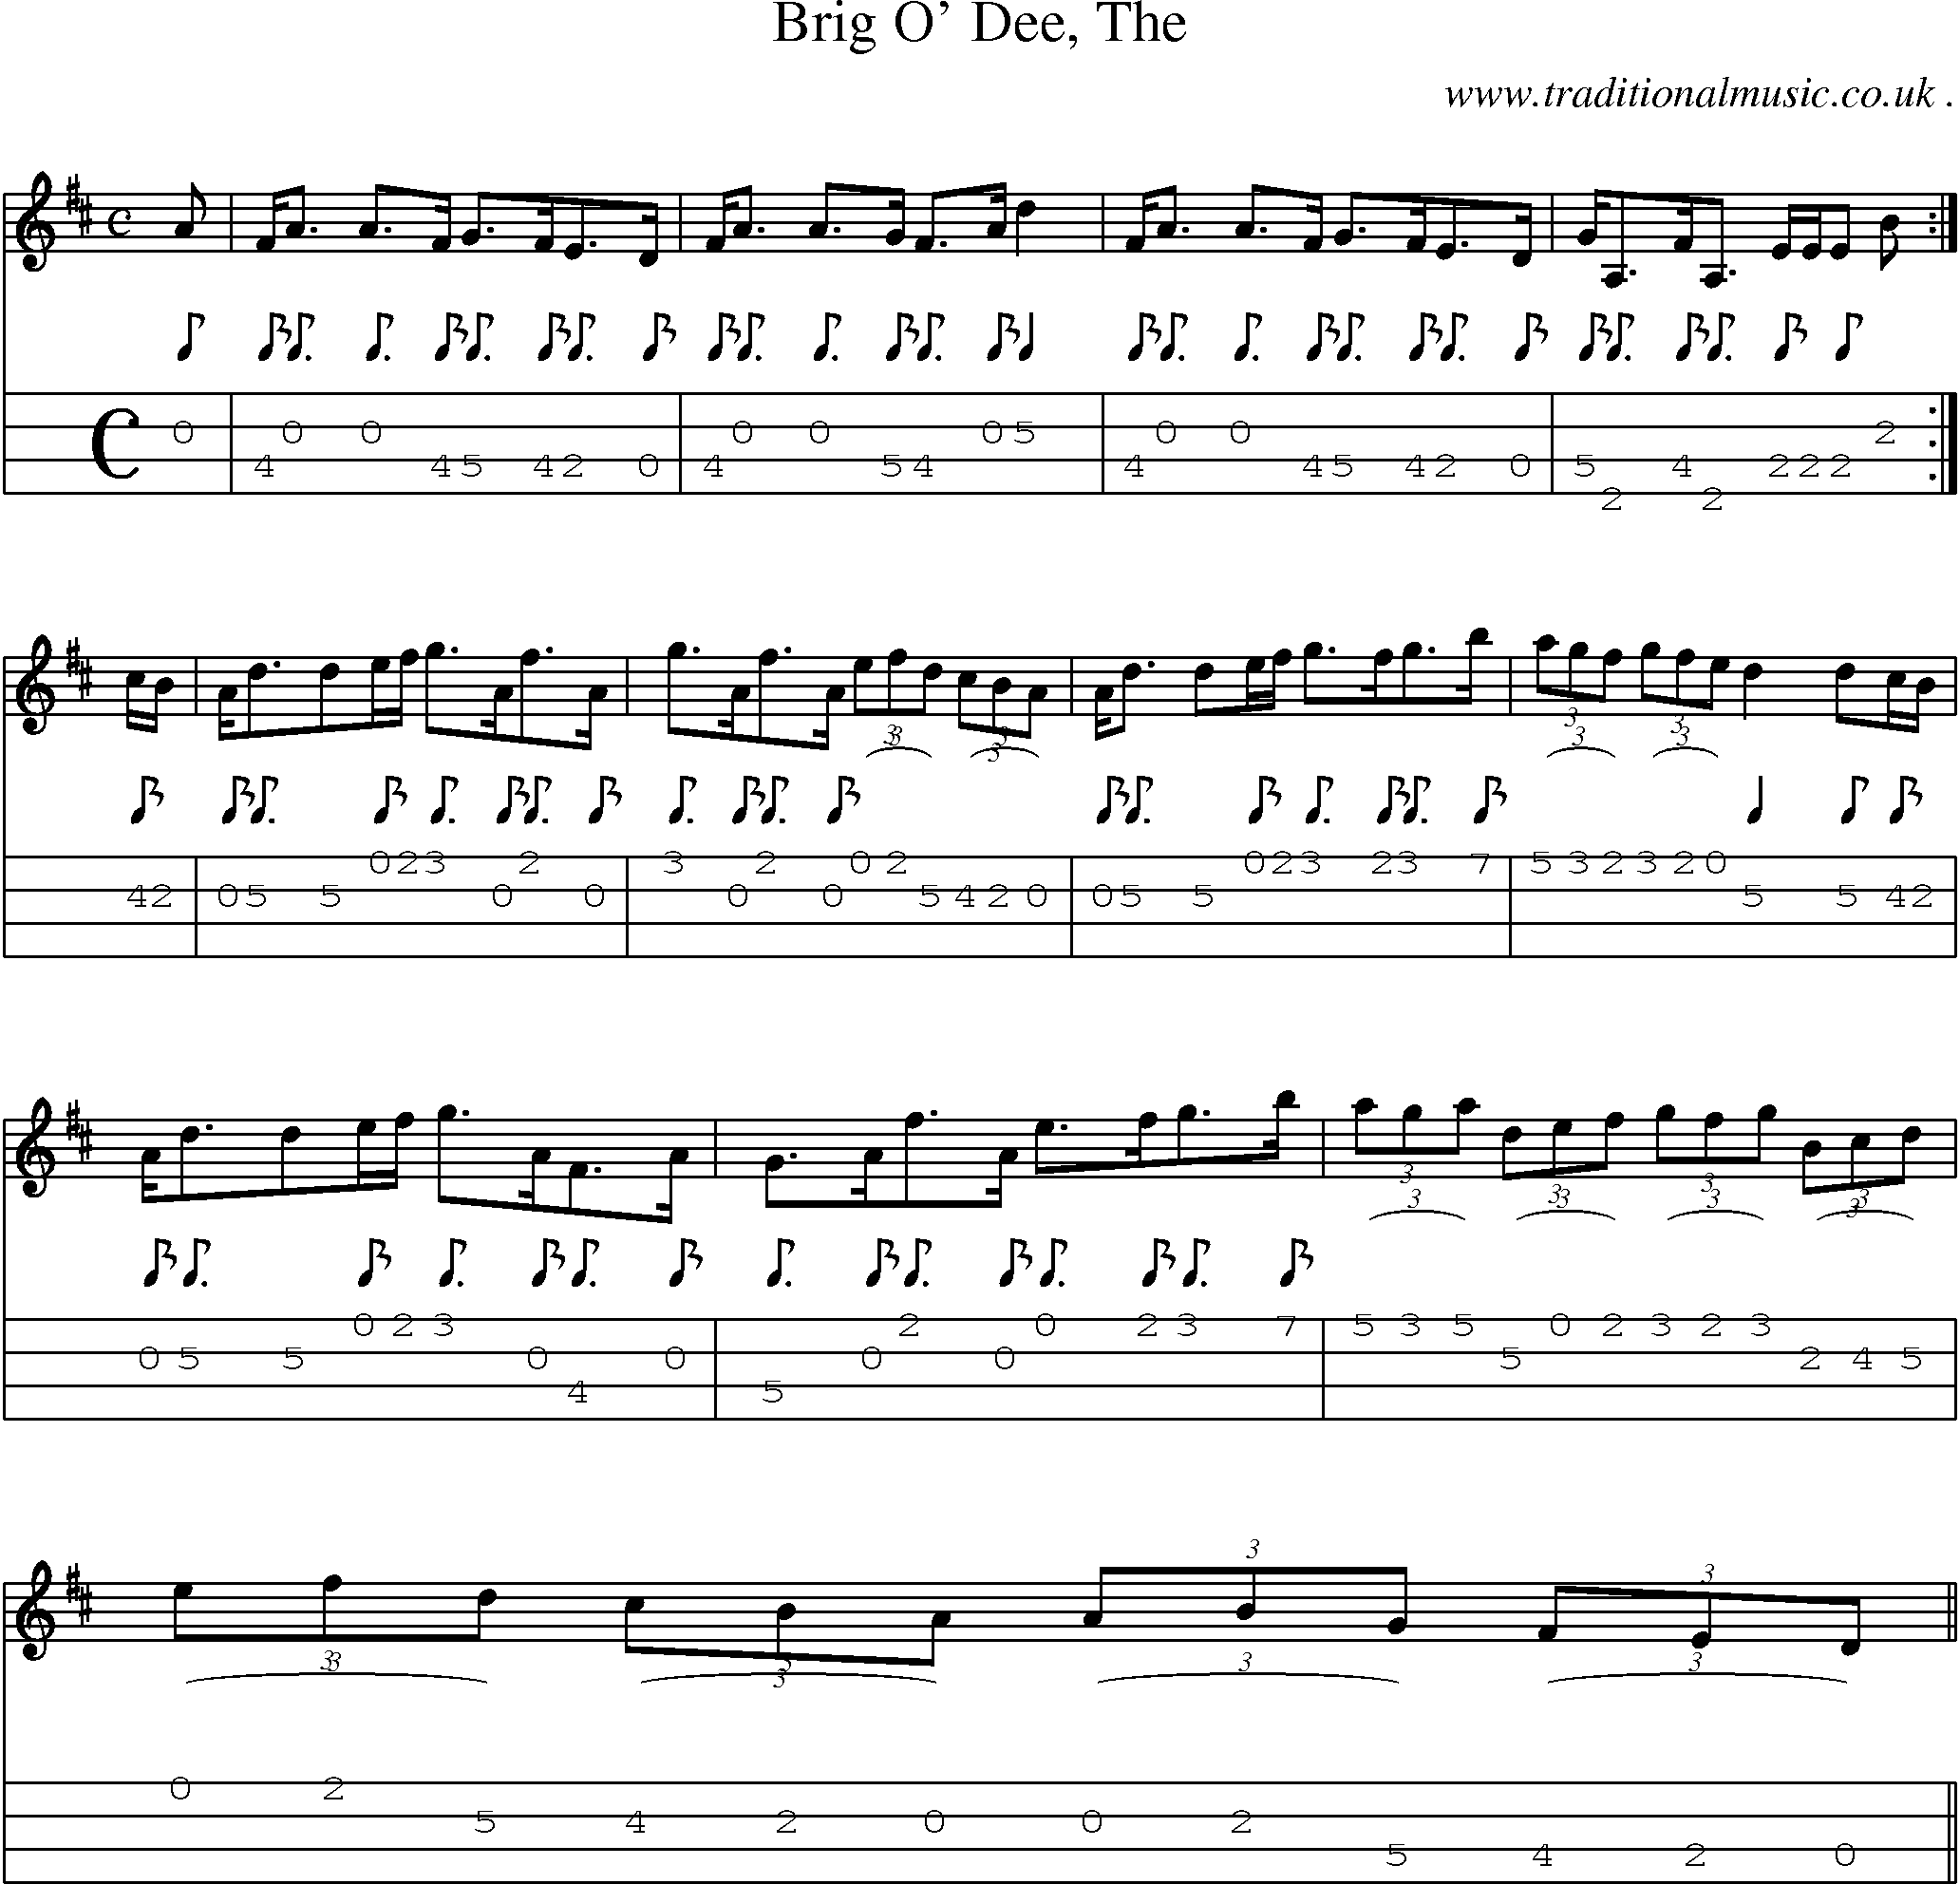 Sheet-music  score, Chords and Mandolin Tabs for Brig O Dee The